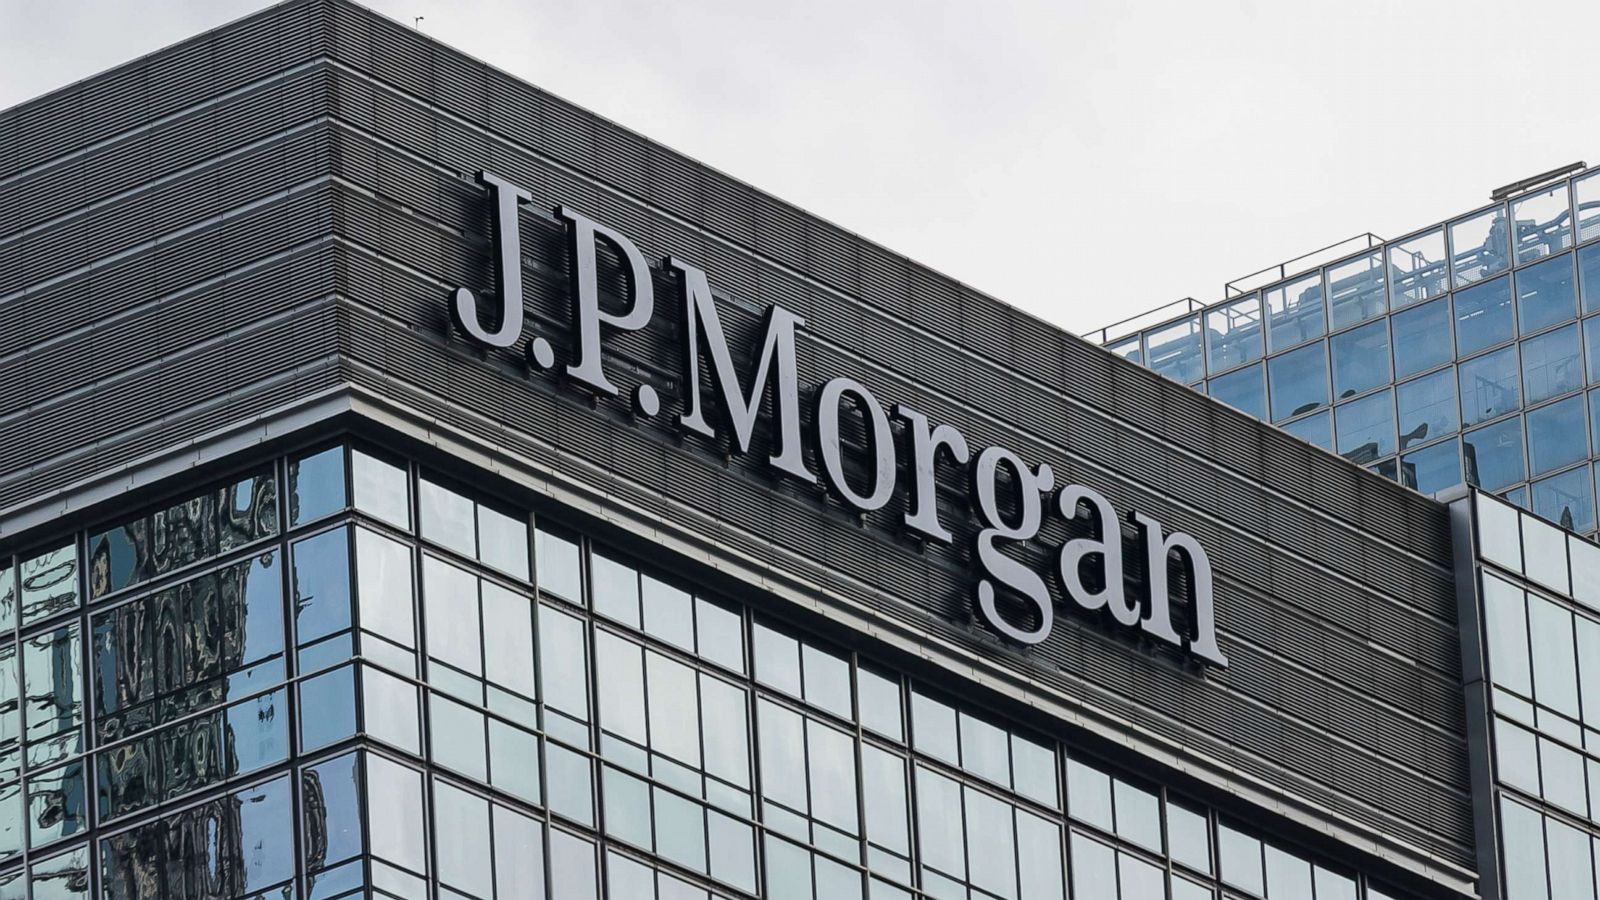 Jp Morgan Jobs Recruitment For Software Engineers Career Registration Link For Jp Morgan Software Jobs Freshers India Freshers Jobs In Hyderabad In Bangalore